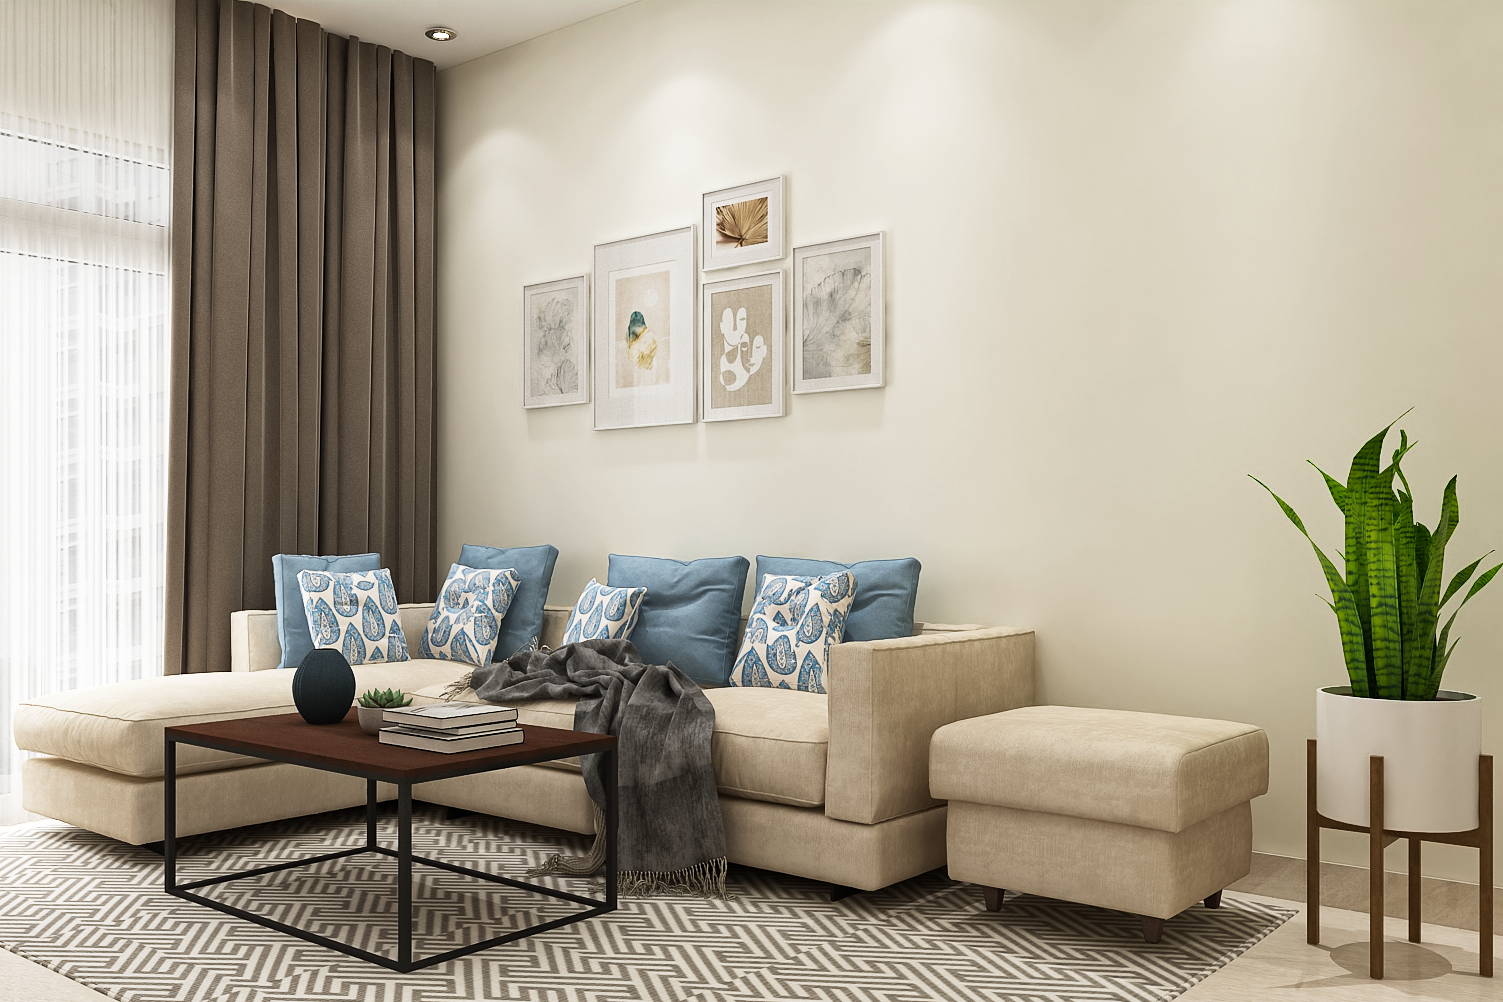 Modern Living Room Design With L Shaped Beige And Blue Sofa